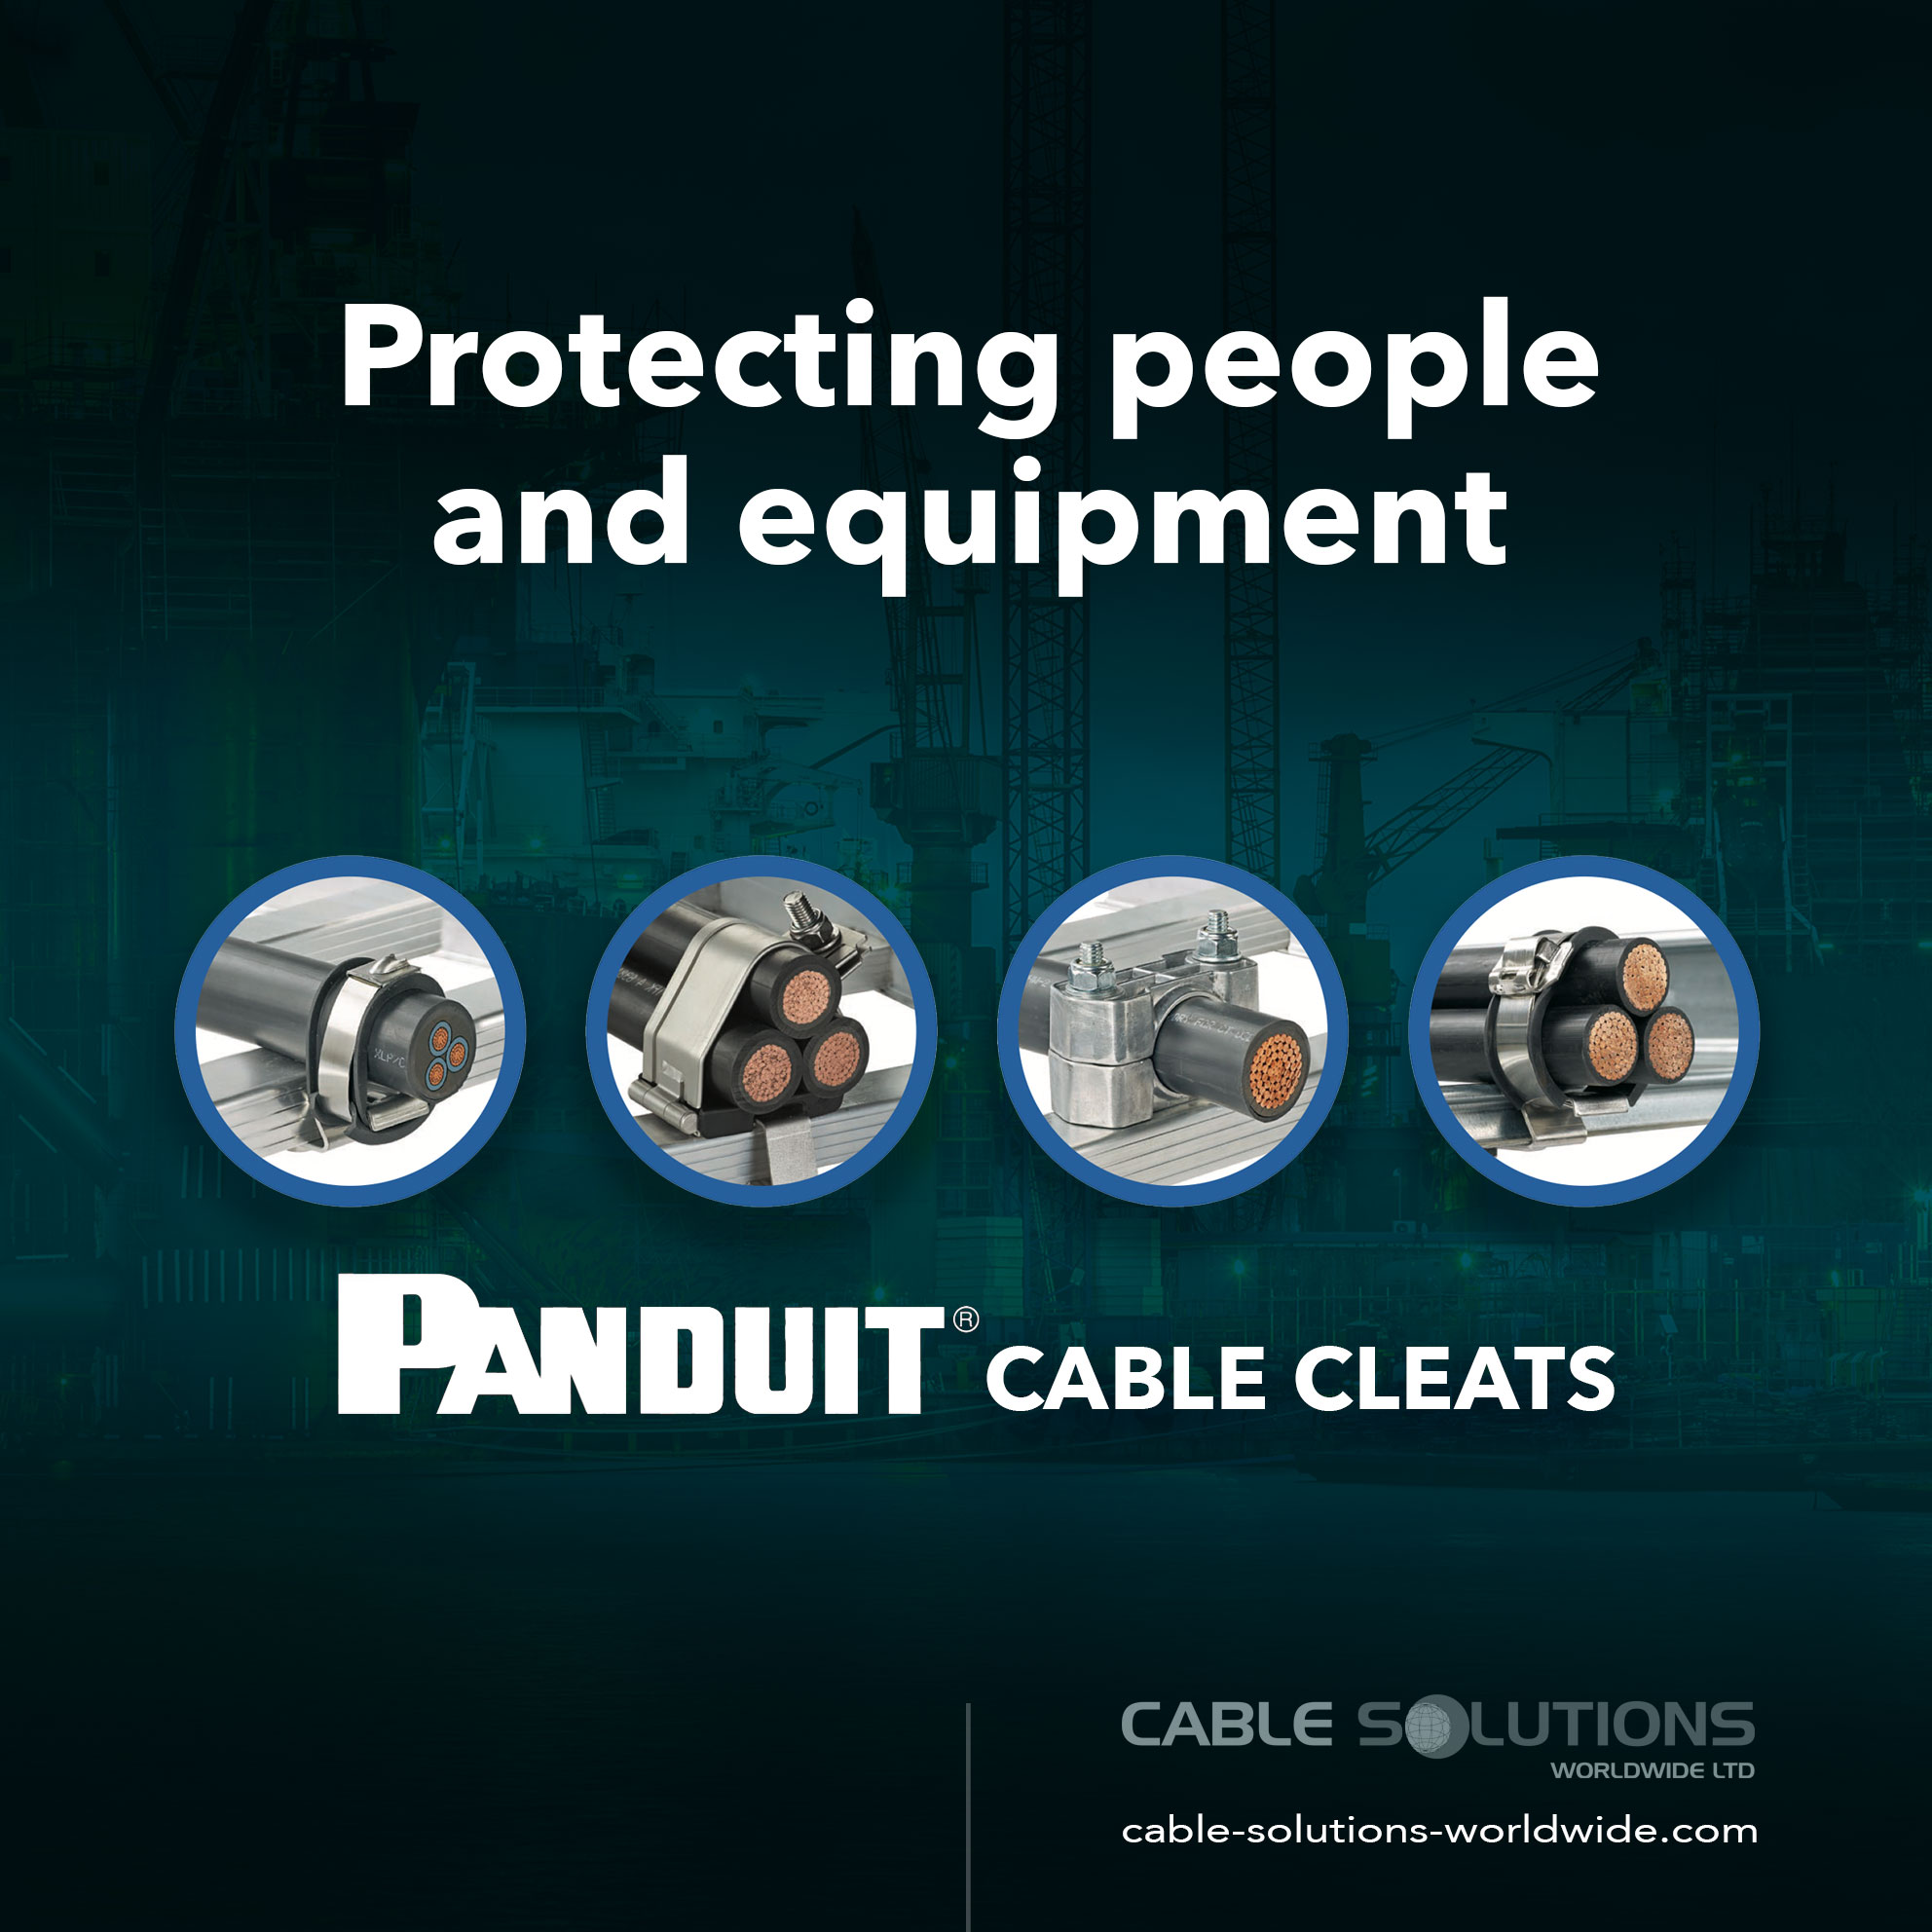 Panduit cable cleat solutions